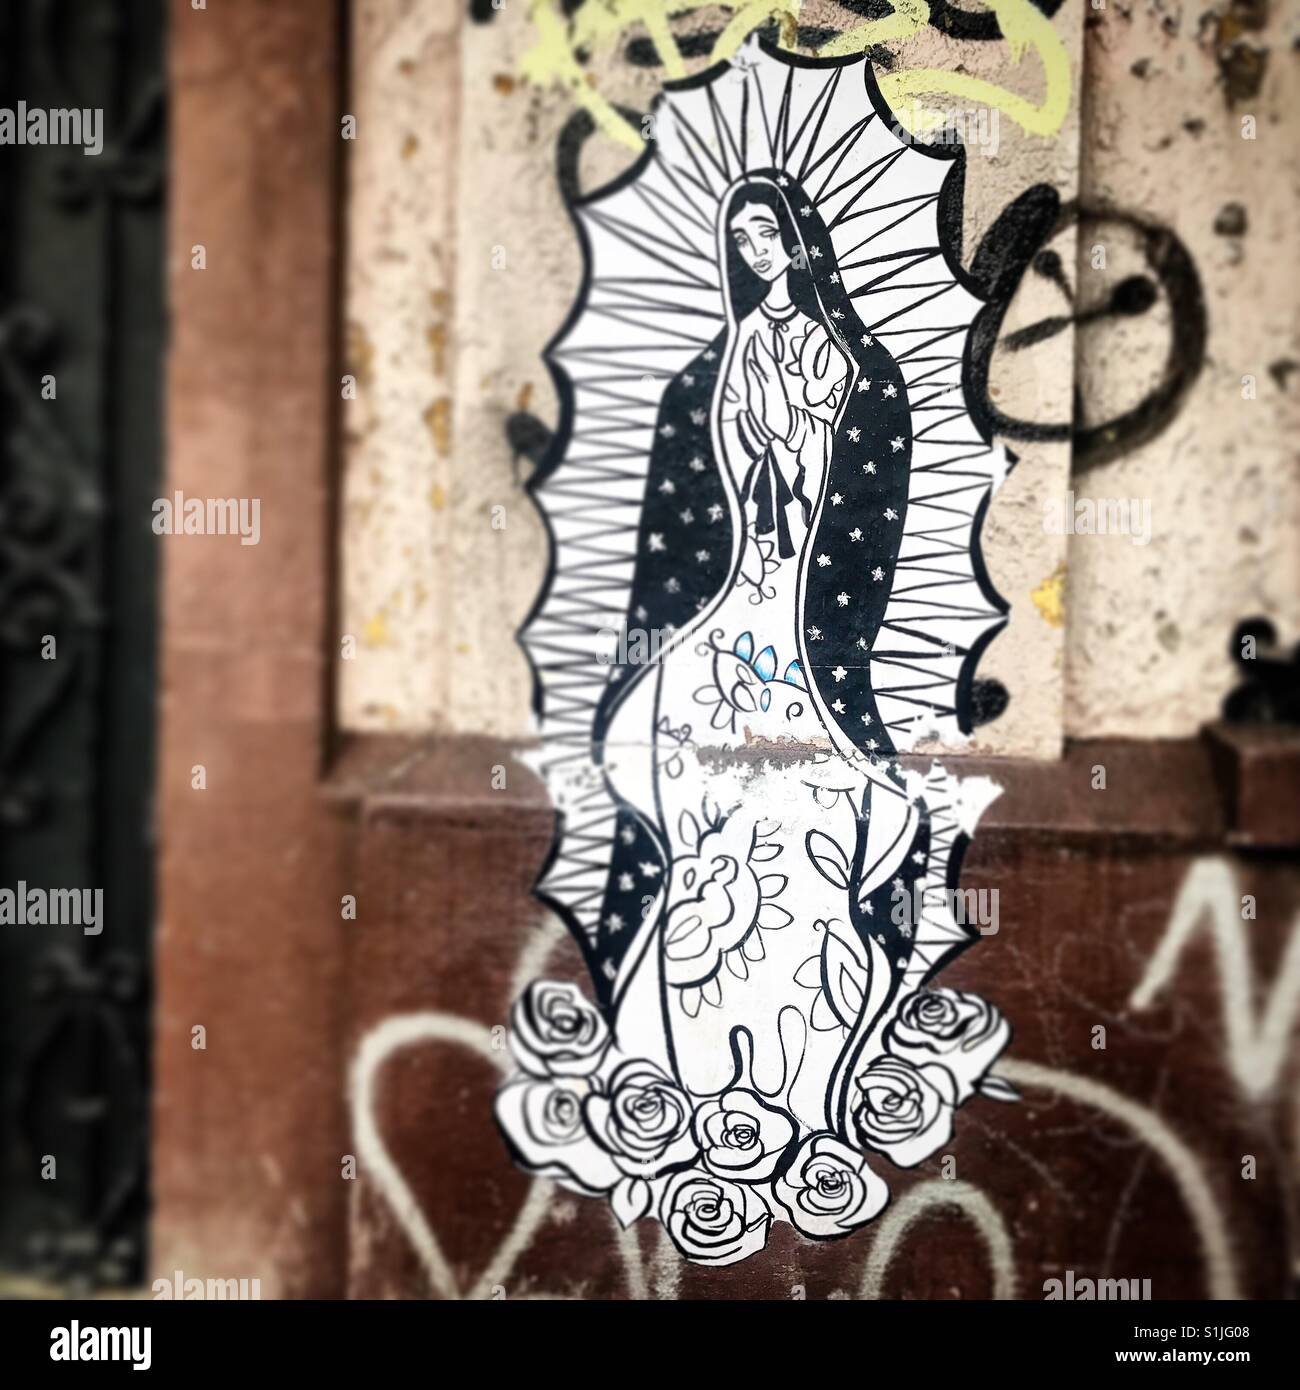 A paper sticker with the image of Our Lady of Guadalupe surrounded by graffiti in a street of Mexico City, Mexico Stock Photo